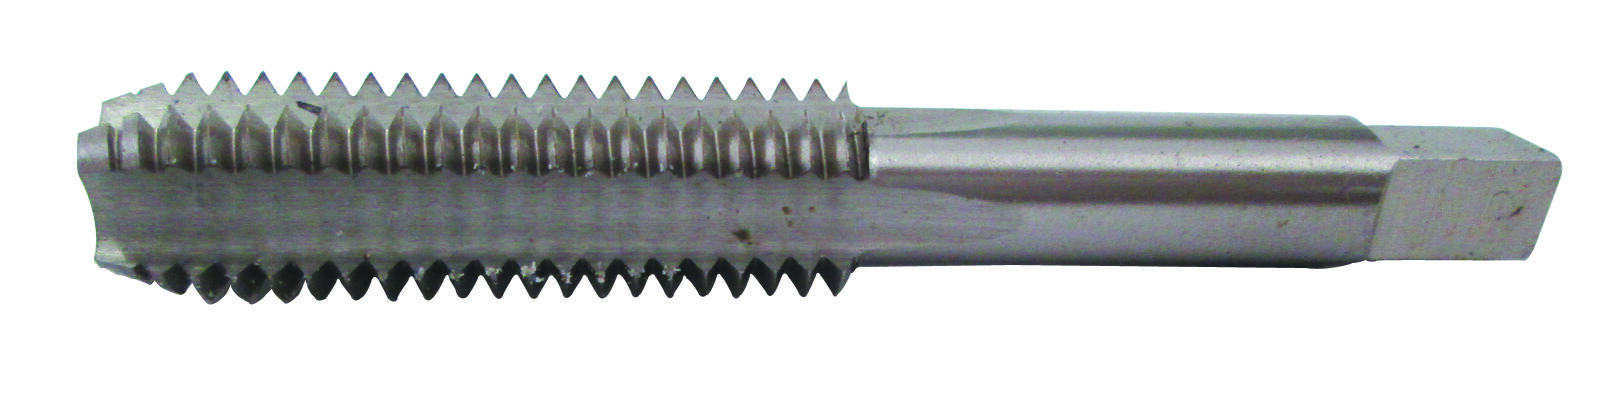 3/8 - 20 HSS Bottoming Hand Tap - 3 pieces